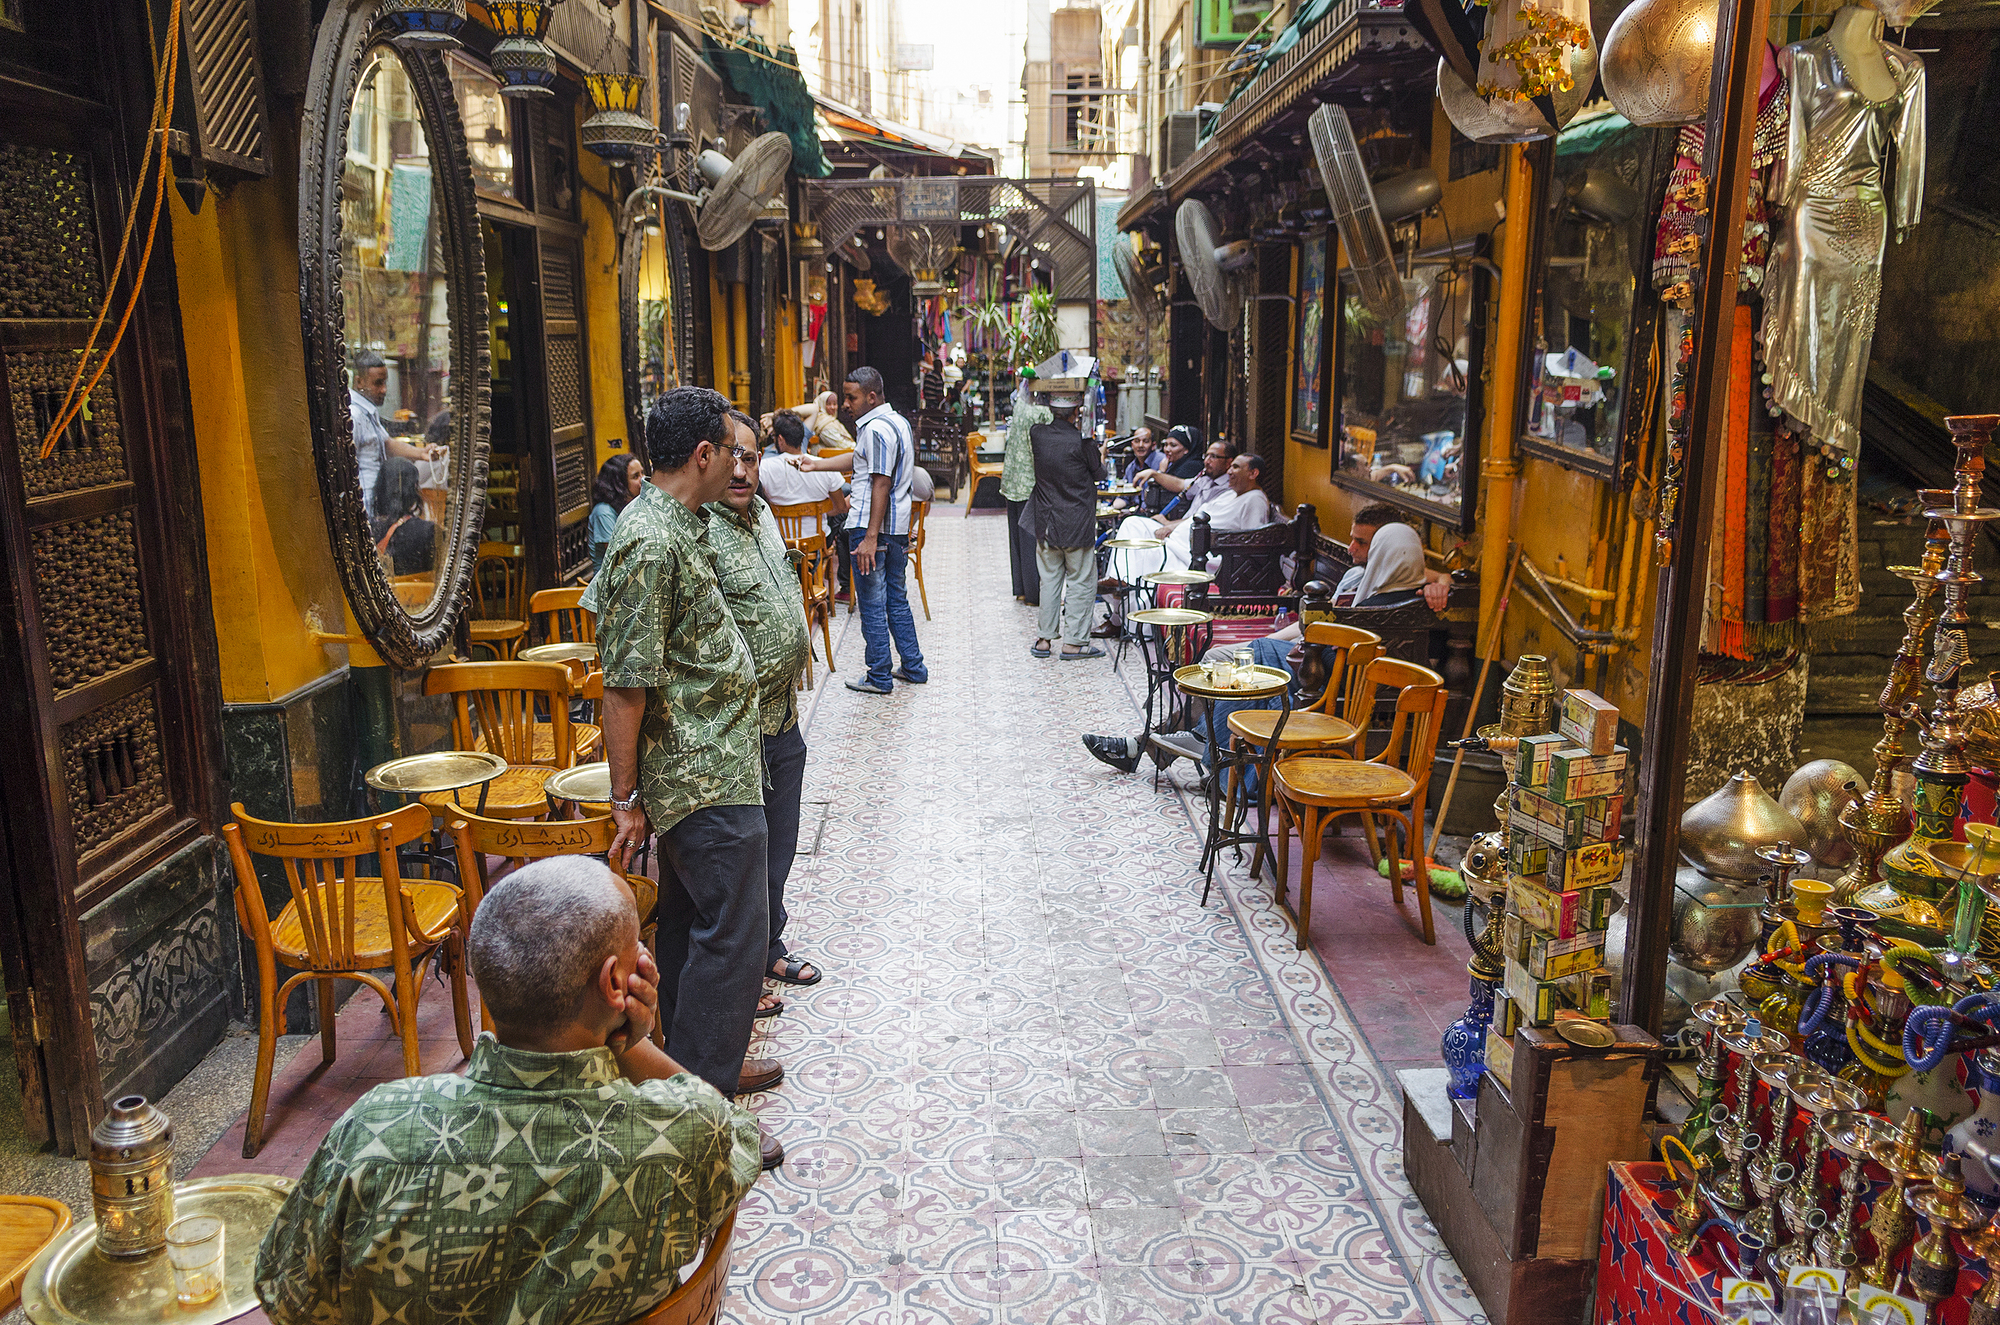 souk market cafe in cairo in egypt